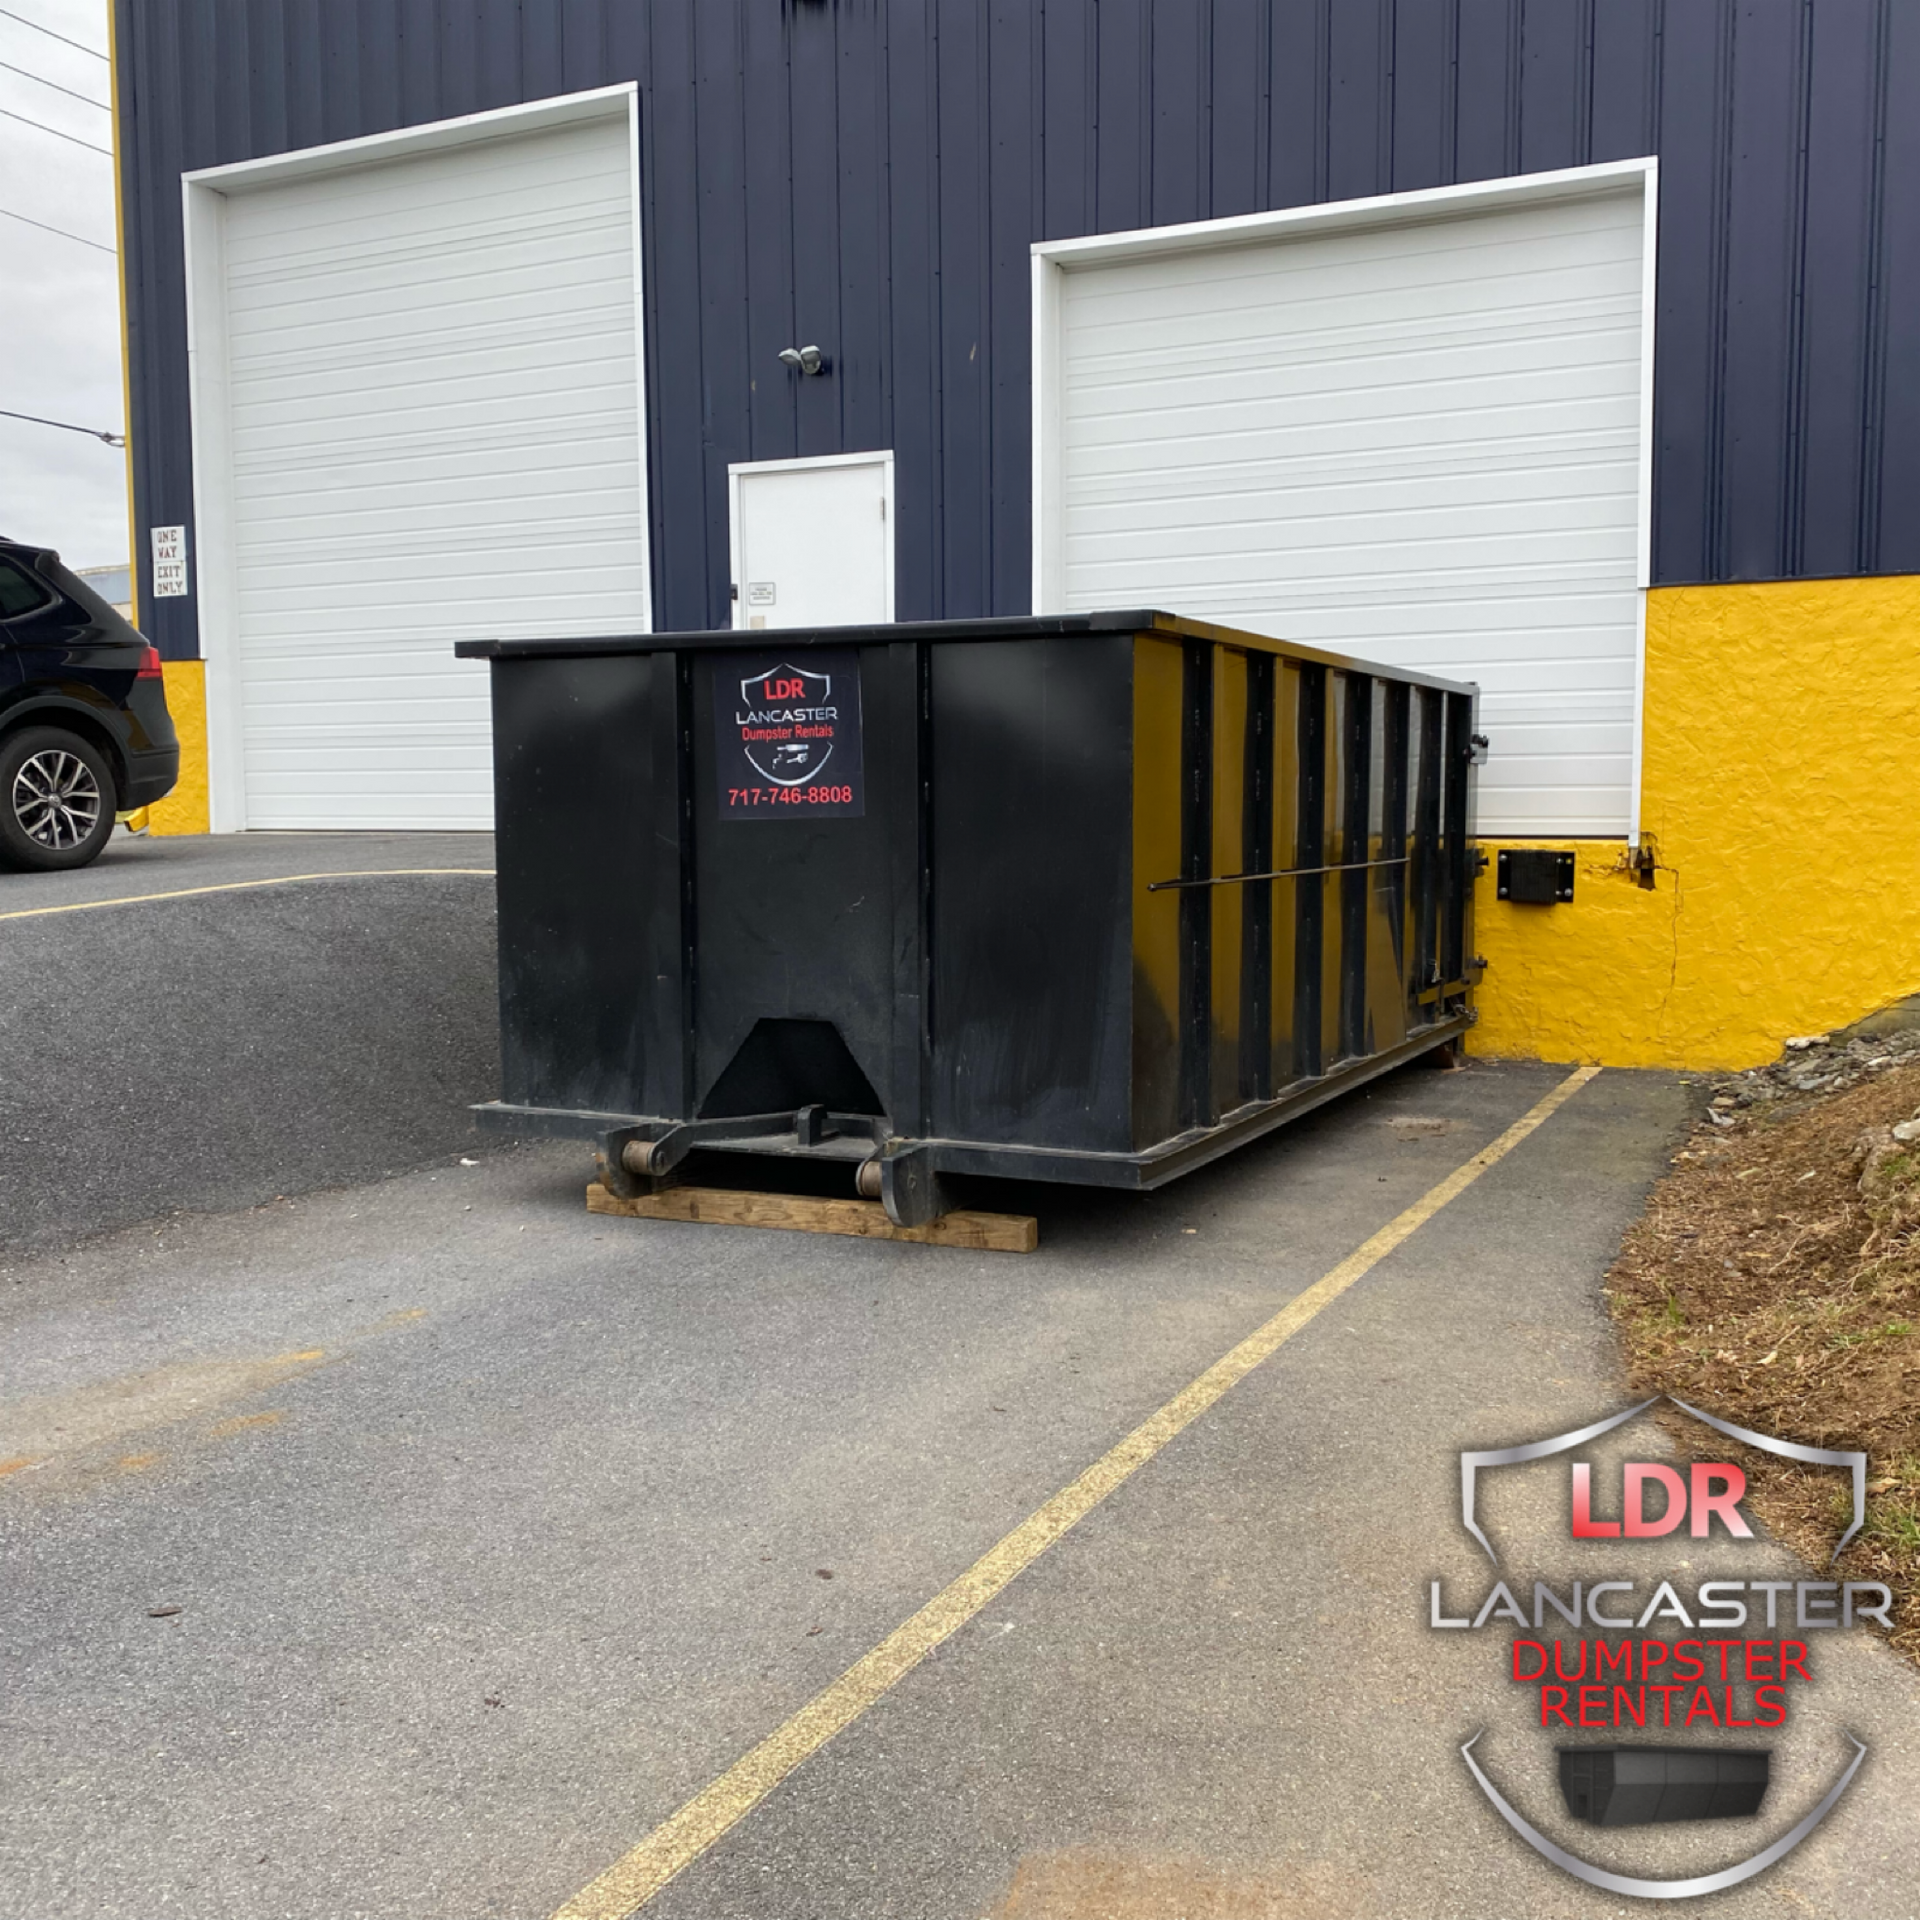 Dumpster Rental in Wrightsville Pa, 17368